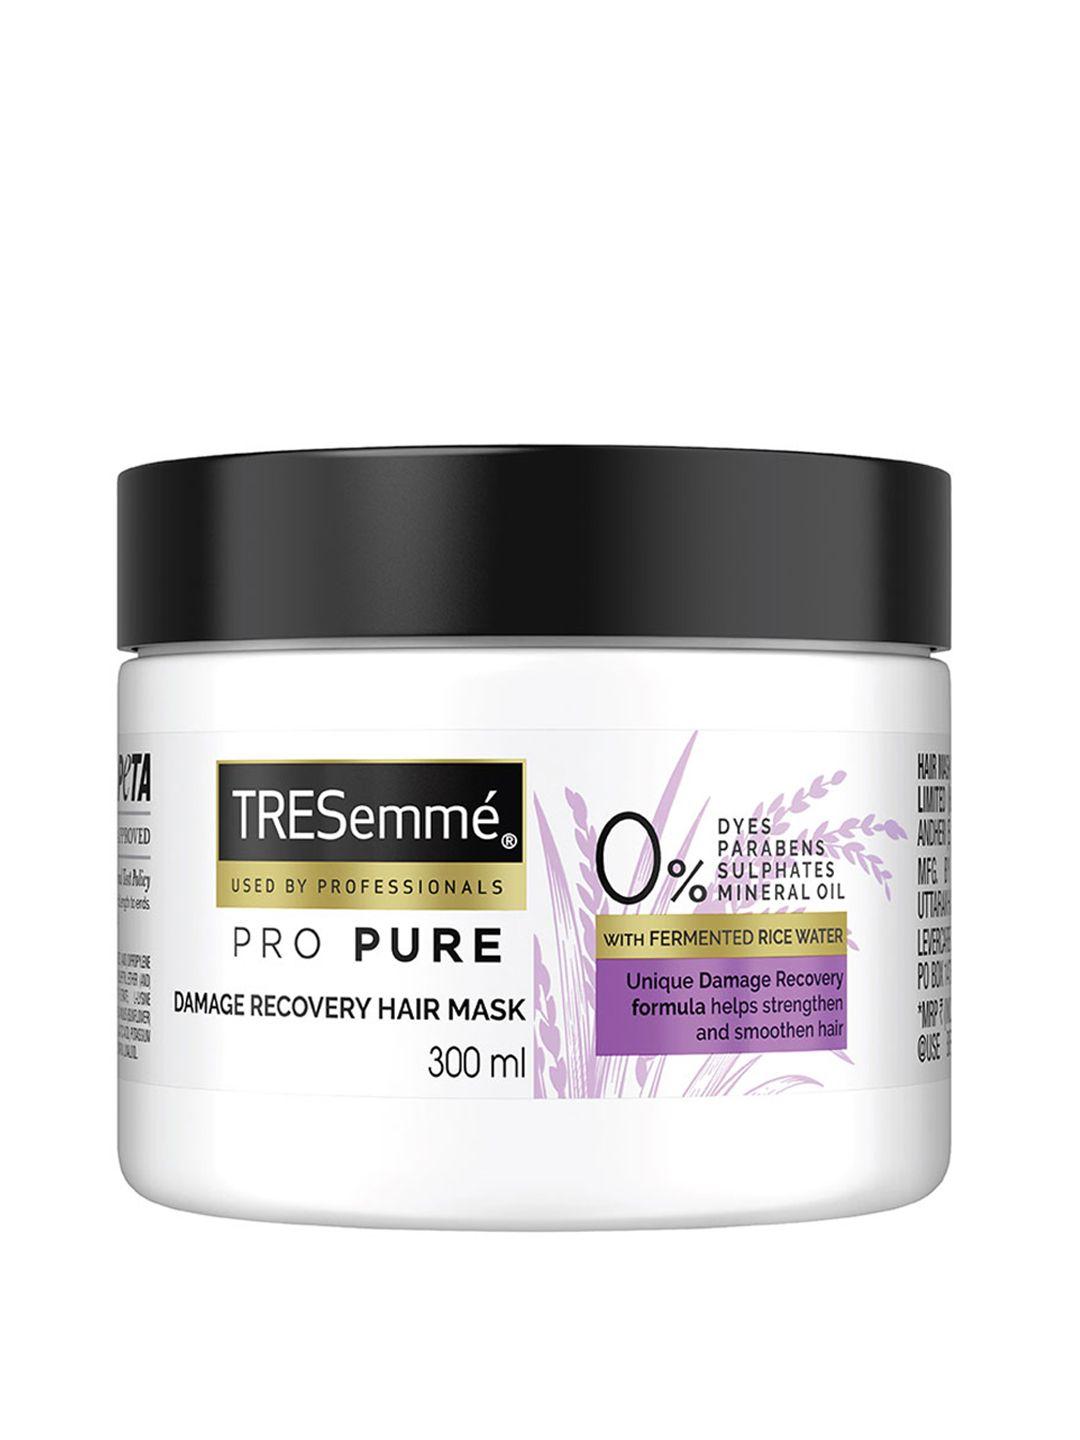 tresemme-propure-damage-recovery-hair-mask-with-coconut-oil---300-ml